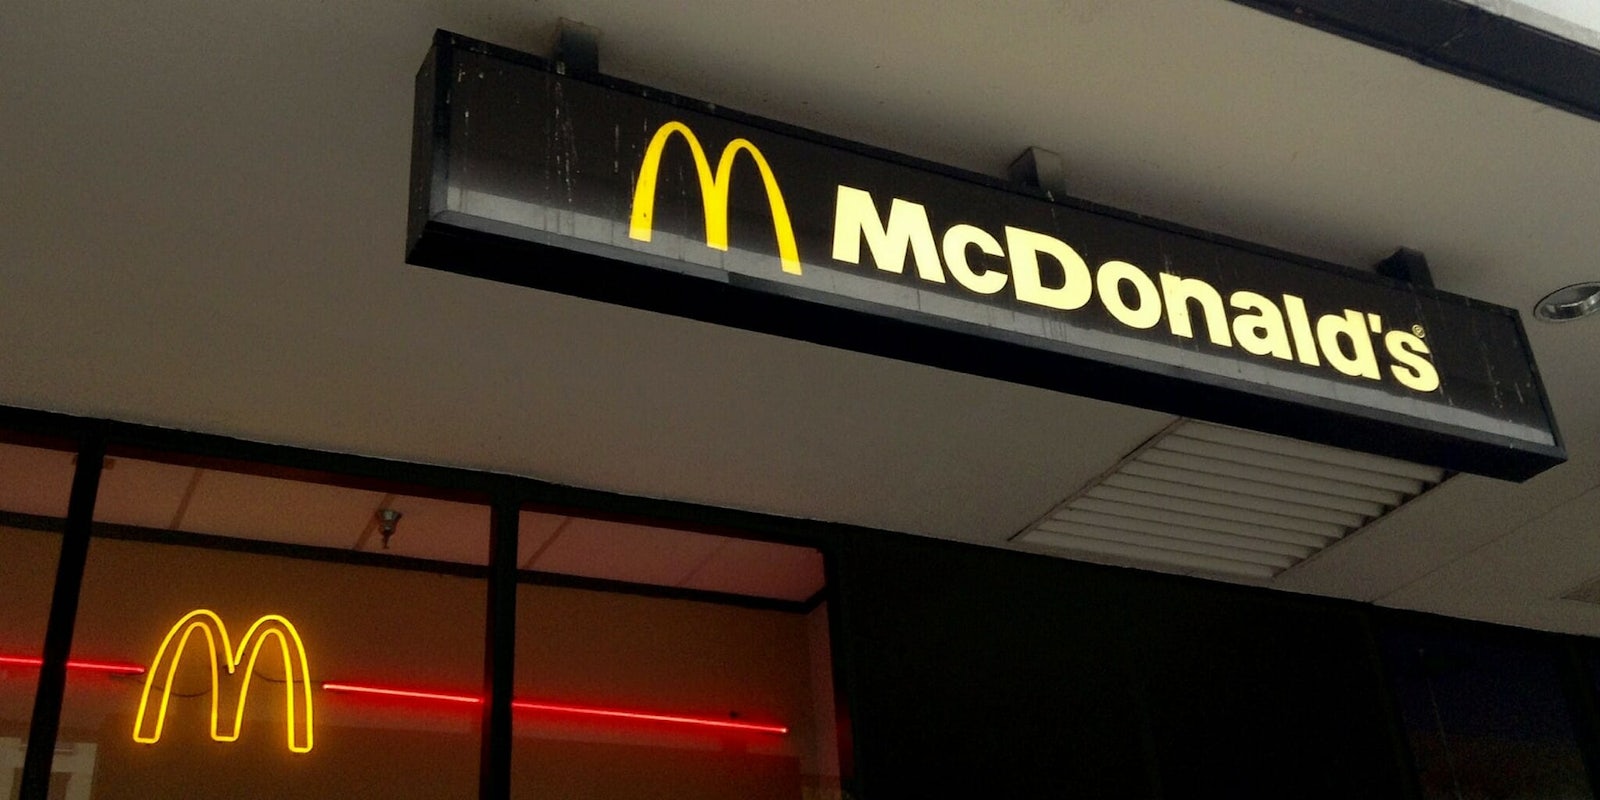 A teen says she was asked to take off her hijab to be served at a London McDonald's.